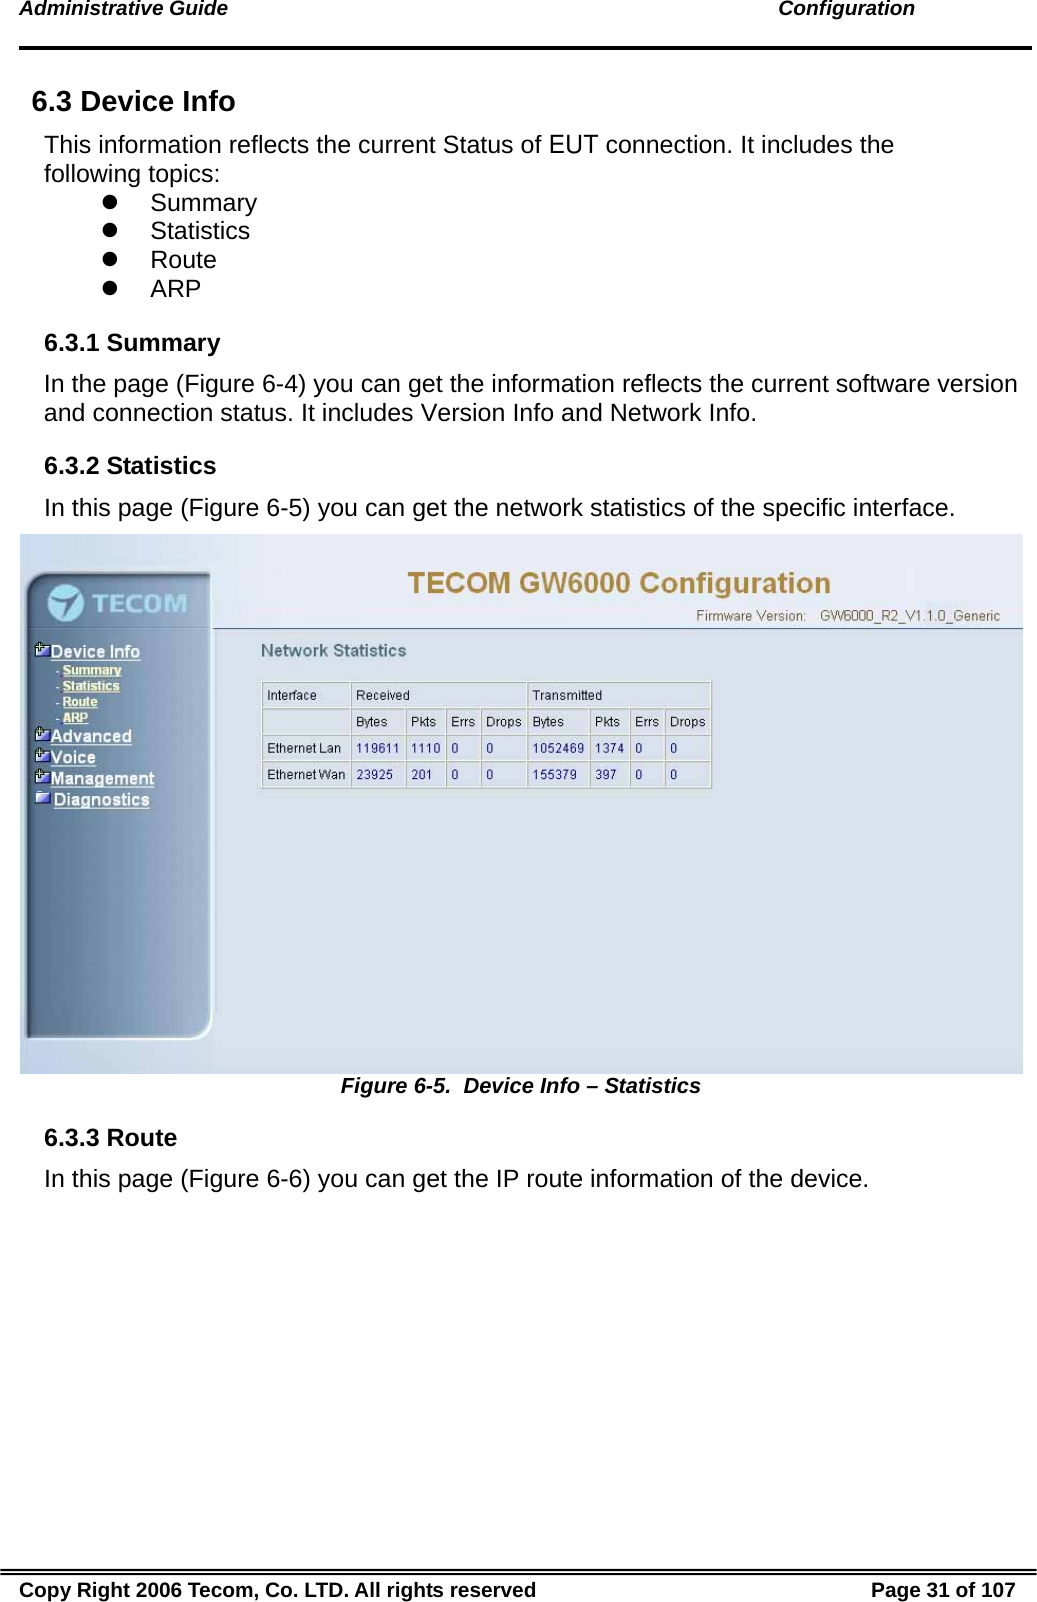 Administrative Guide                                                                                               Configuration 6.3 Device Info This information reflects the current Status of EUT connection. It includes the following topics: z Summary z Statistics z Route z ARP 6.3.1 Summary In the page (Figure 6-4) you can get the information reflects the current software version and connection status. It includes Version Info and Network Info. 6.3.2 Statistics In this page (Figure 6-5) you can get the network statistics of the specific interface.  Figure 6-5.  Device Info – Statistics 6.3.3 Route In this page (Figure 6-6) you can get the IP route information of the device. Copy Right 2006 Tecom, Co. LTD. All rights reserved  Page 31 of 107 